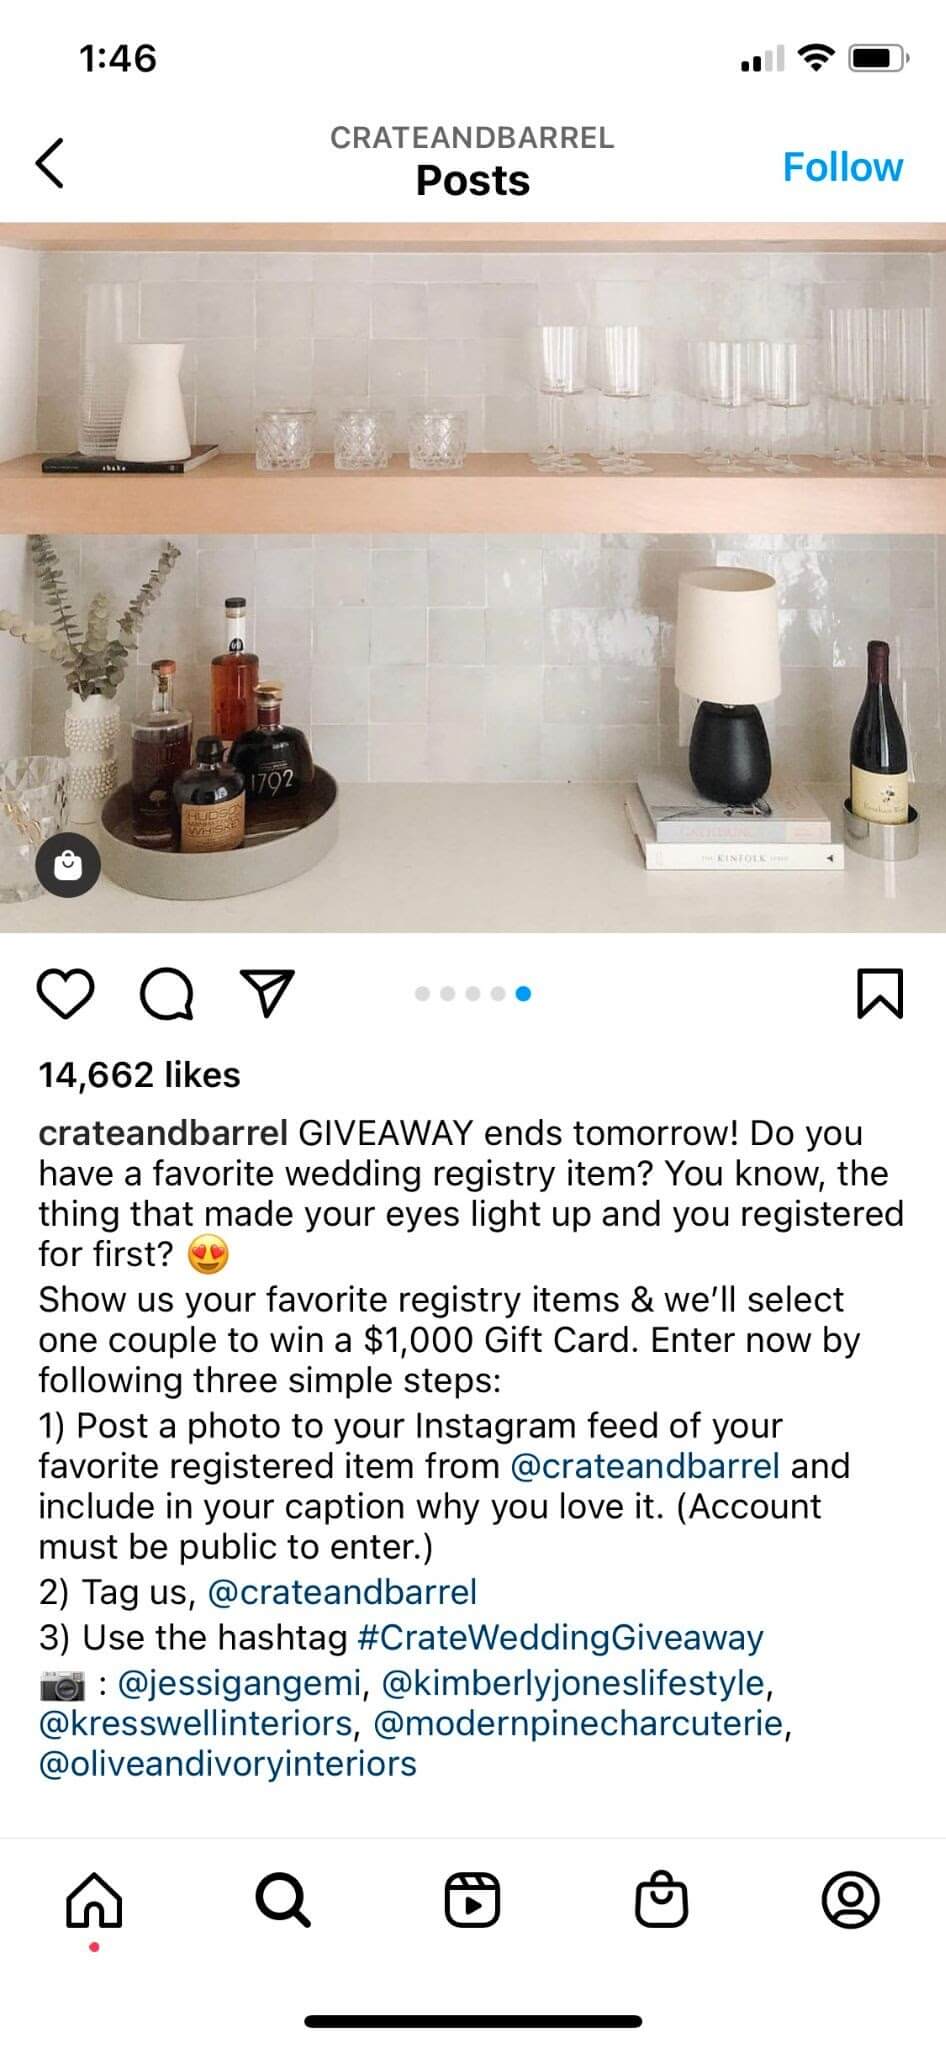 how to get real followers on Instagram